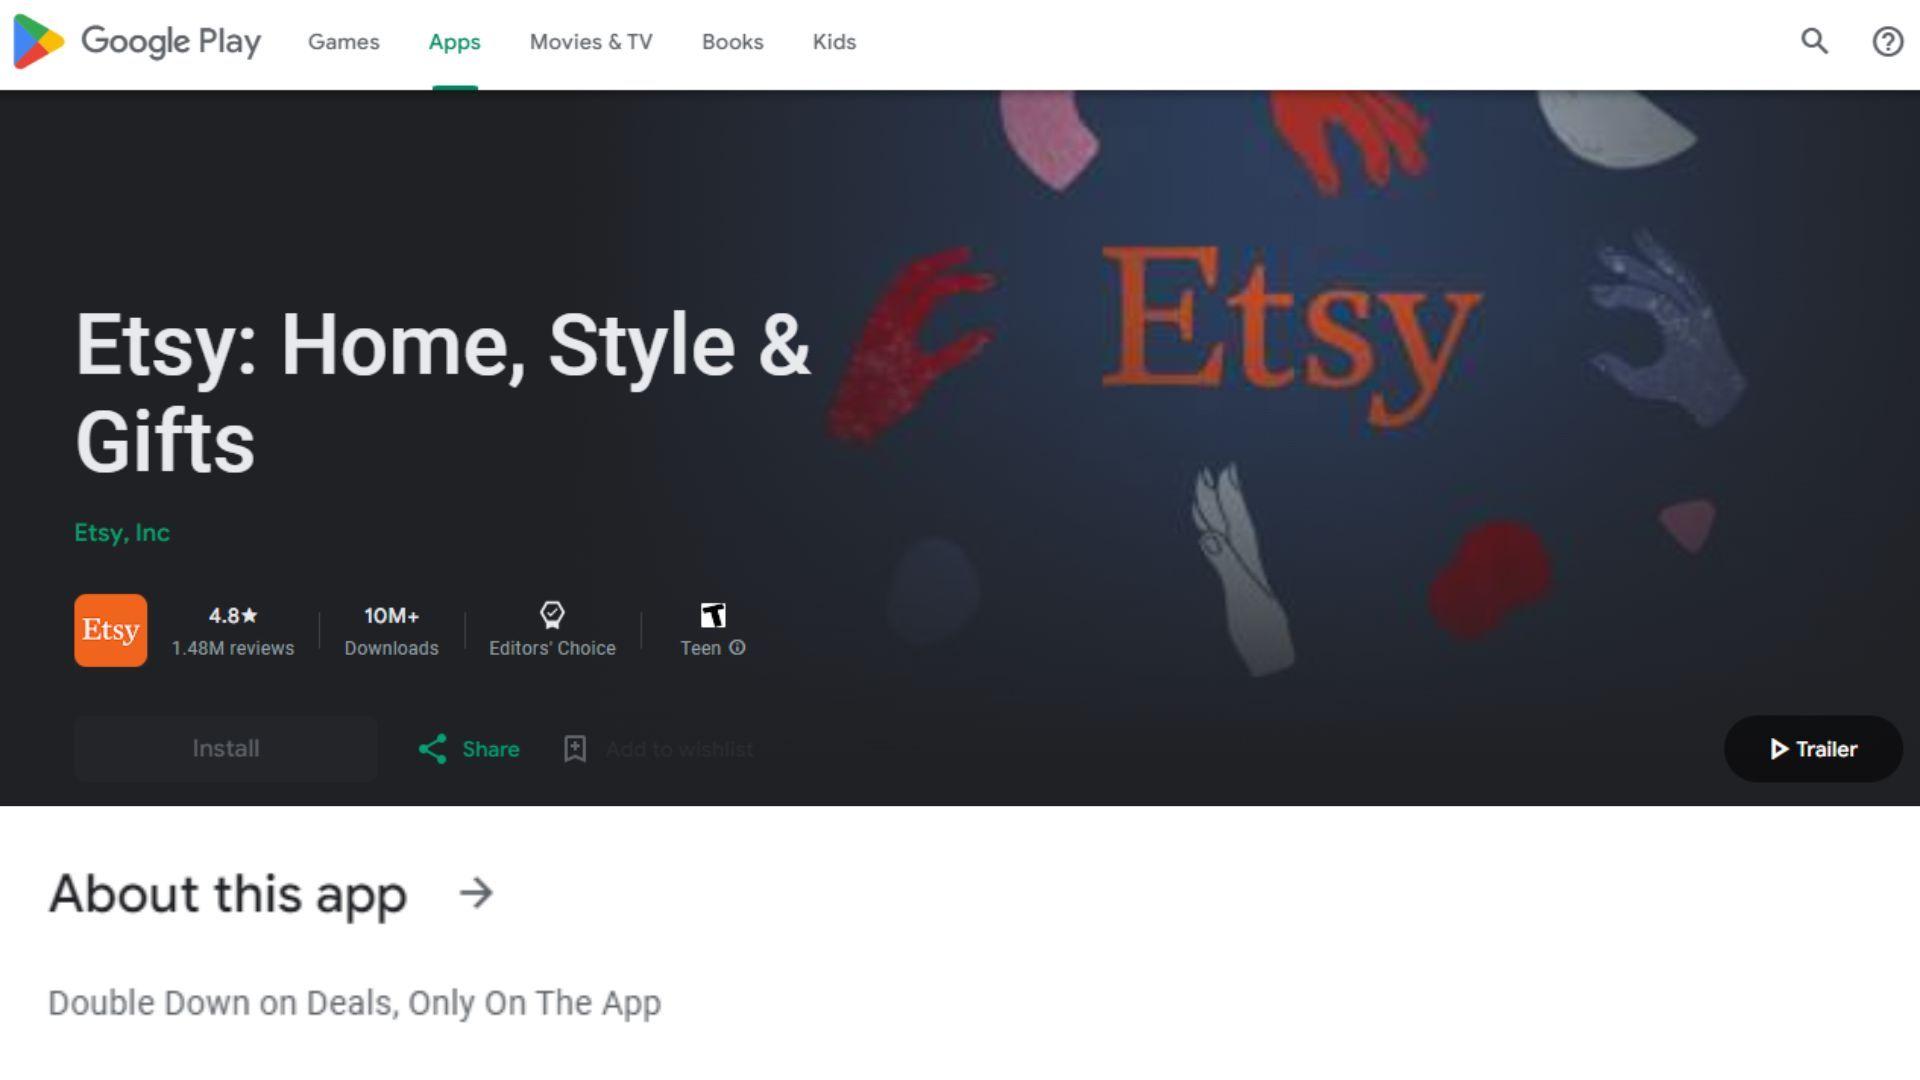 How to download Etsy on Android?